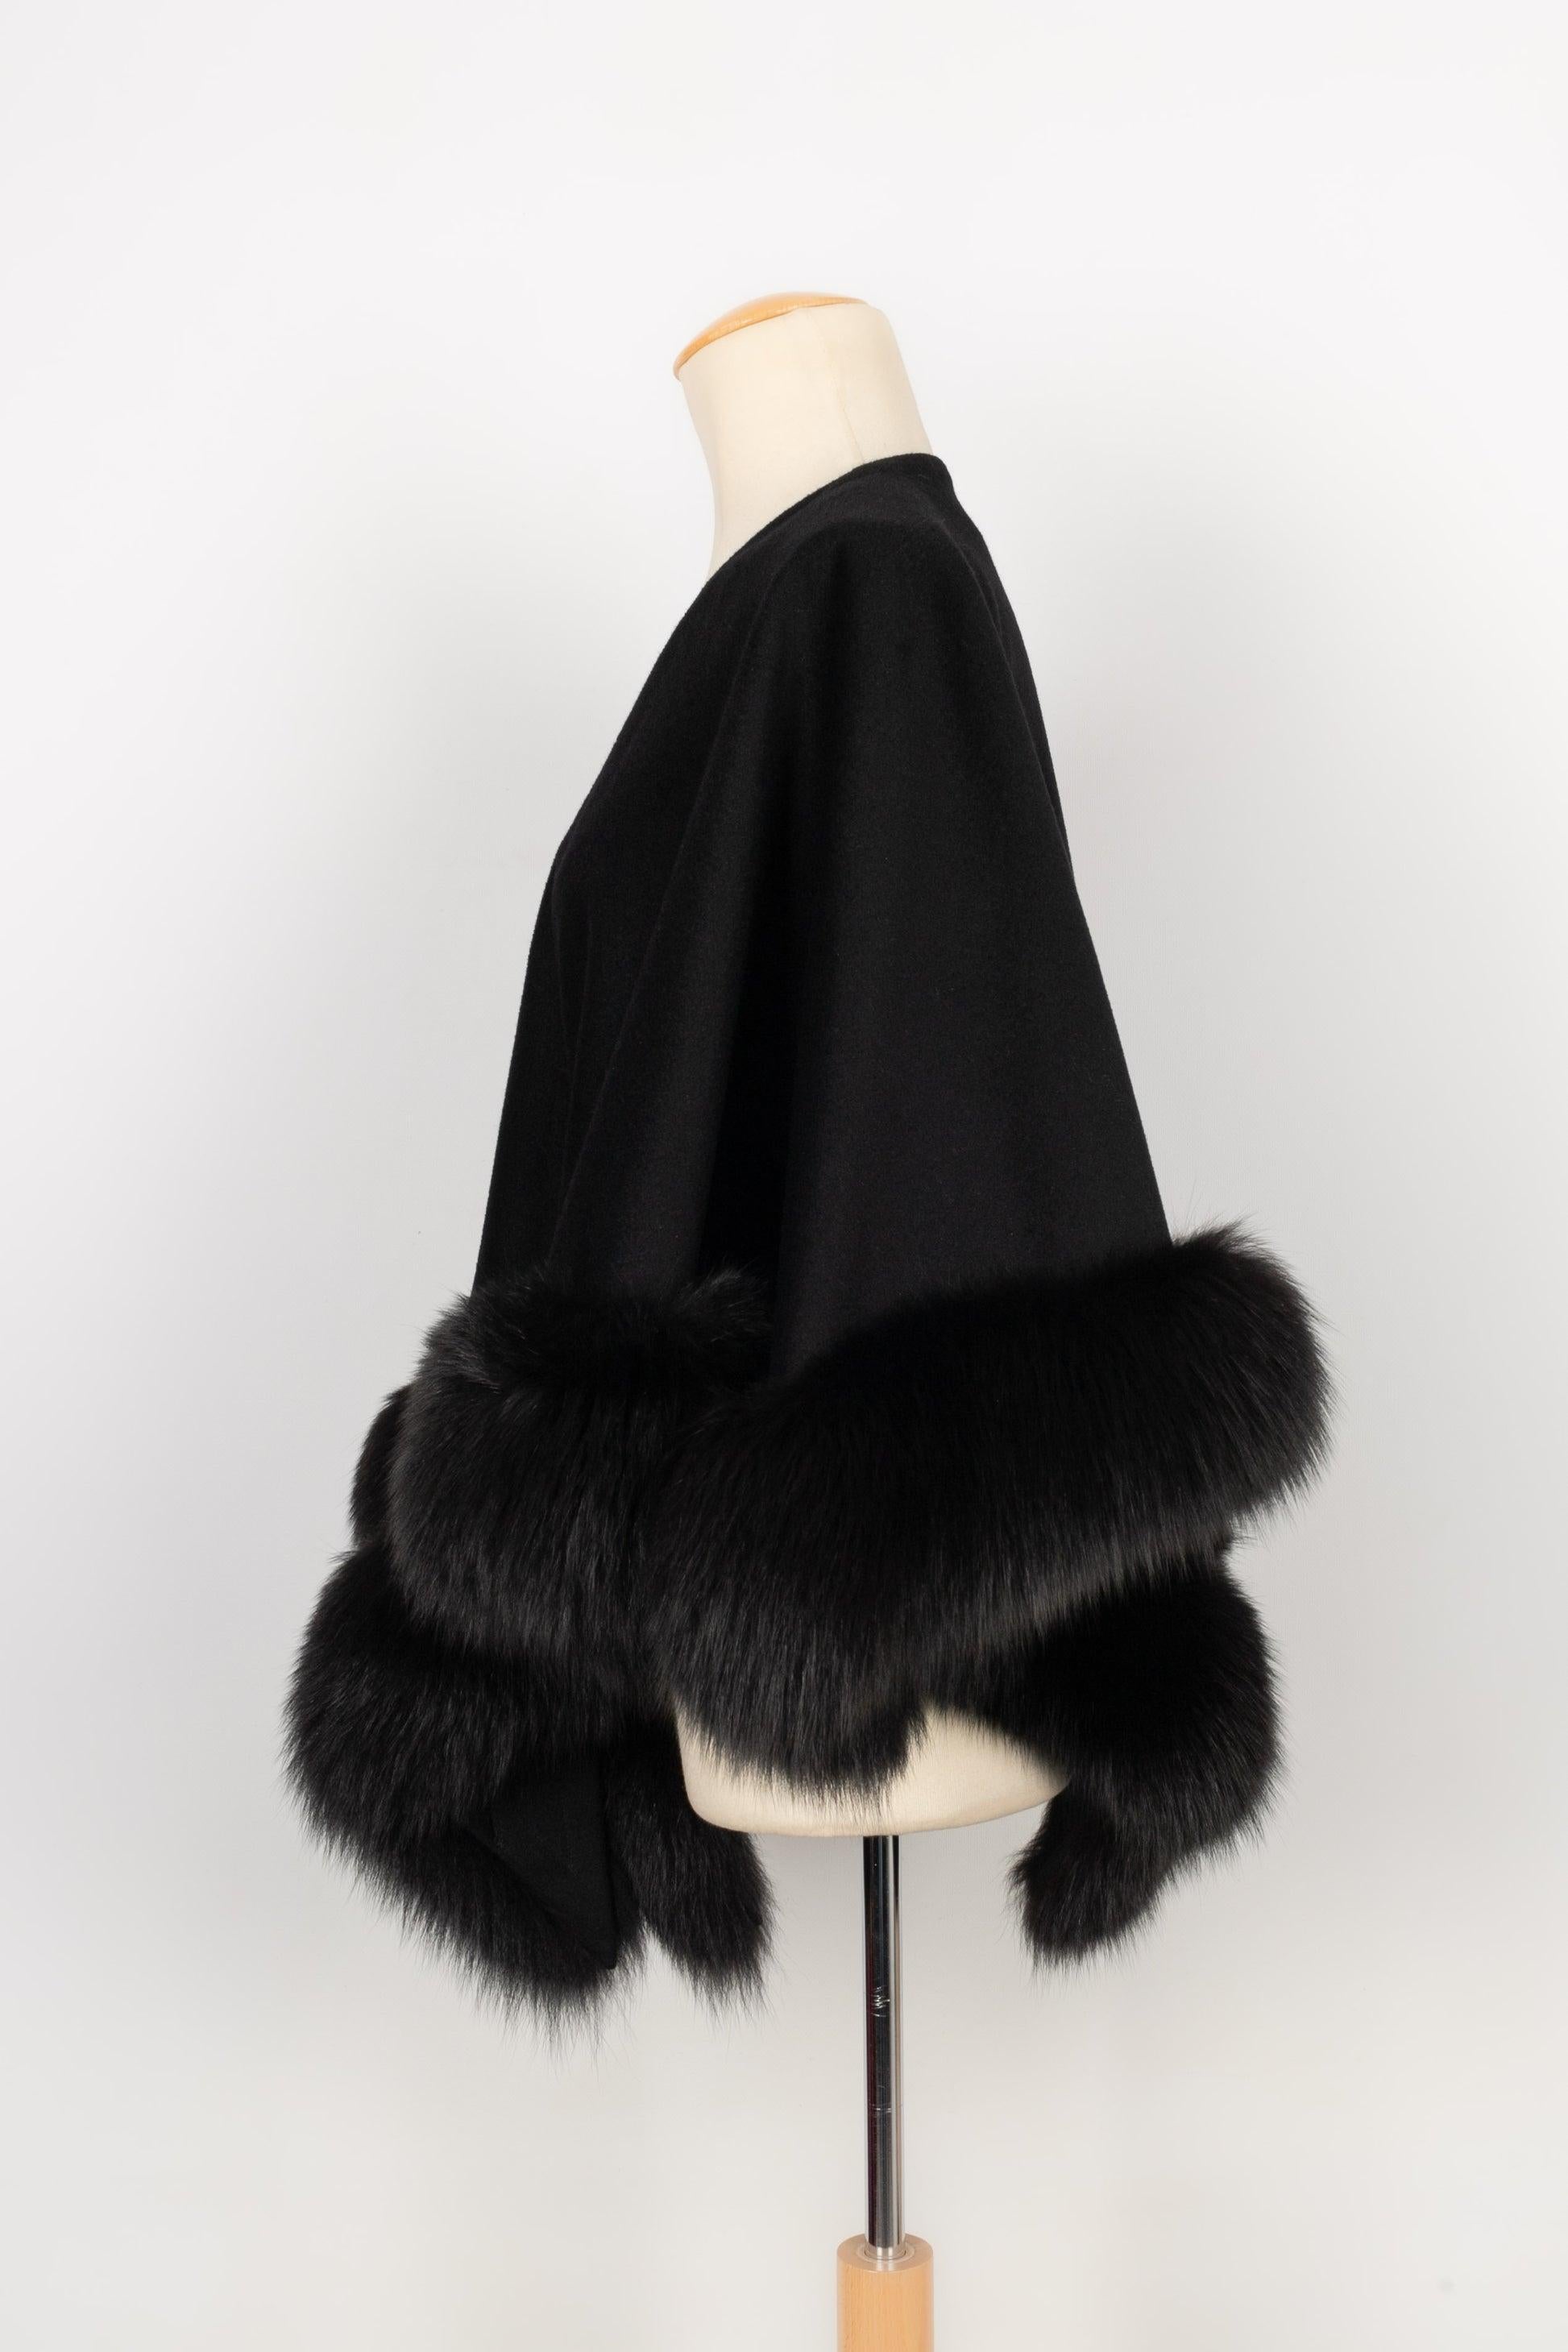 Guy Laroche - (Made in France) Black cape embroidered with fur. No size indicated, it fits a 38FR.

Additional information:
Condition: Very good condition
Dimensions: Length: 77 cm

Seller Reference: M96
